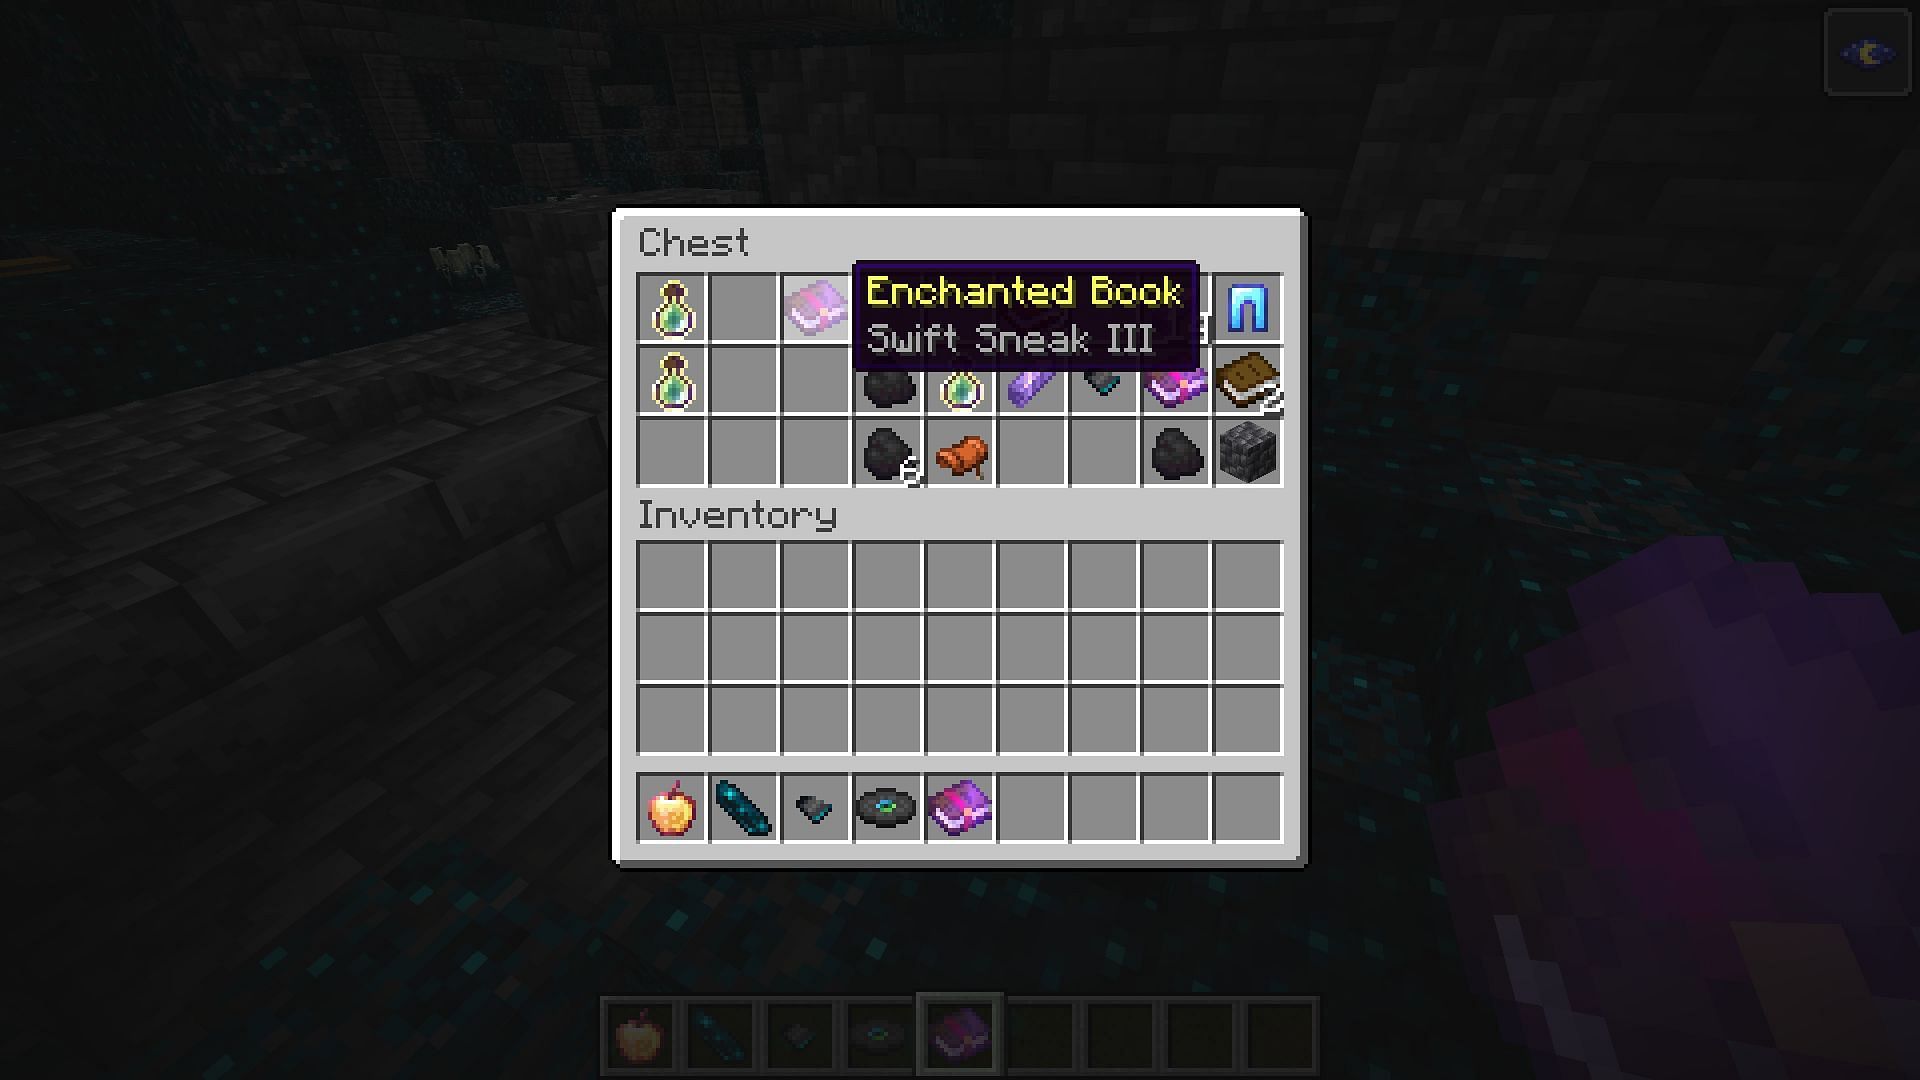 Swift Sneak enchantment allow players to walk faster while crouching in Minecraft (Image via Mojang)